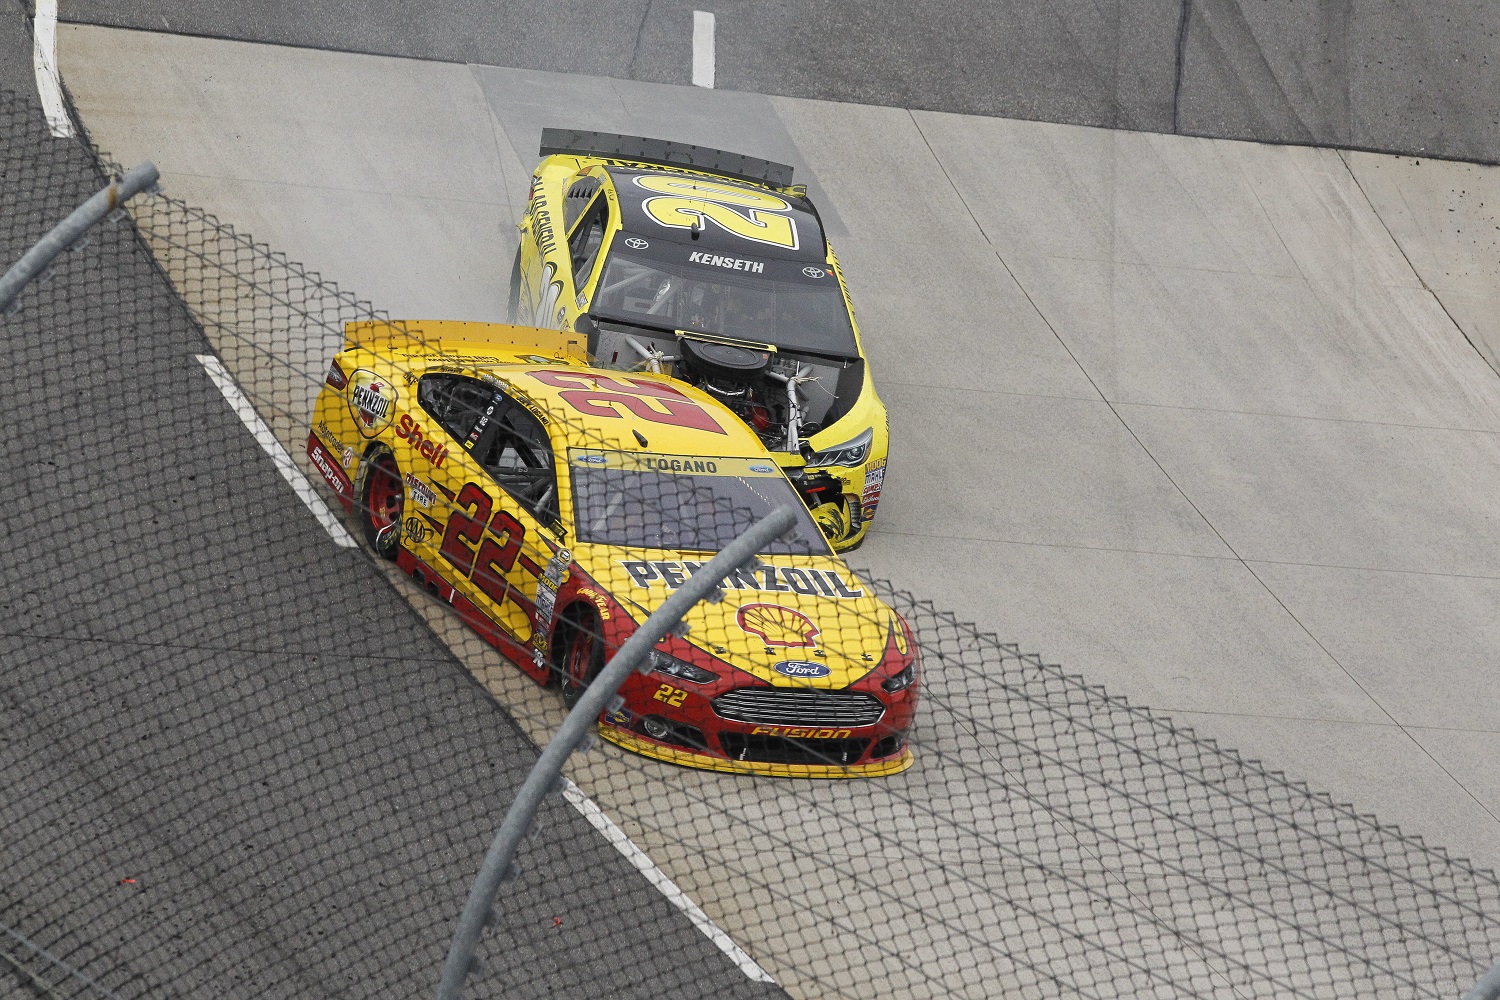 Matt Kenseth collides with Joey Logano and follows him into the wall, knocking the No. 22 Ford out of the NASCAR Cup Series Goody's Headache Relief Shot 500 at Martinsville Speedway on Nov. 1, 2015.